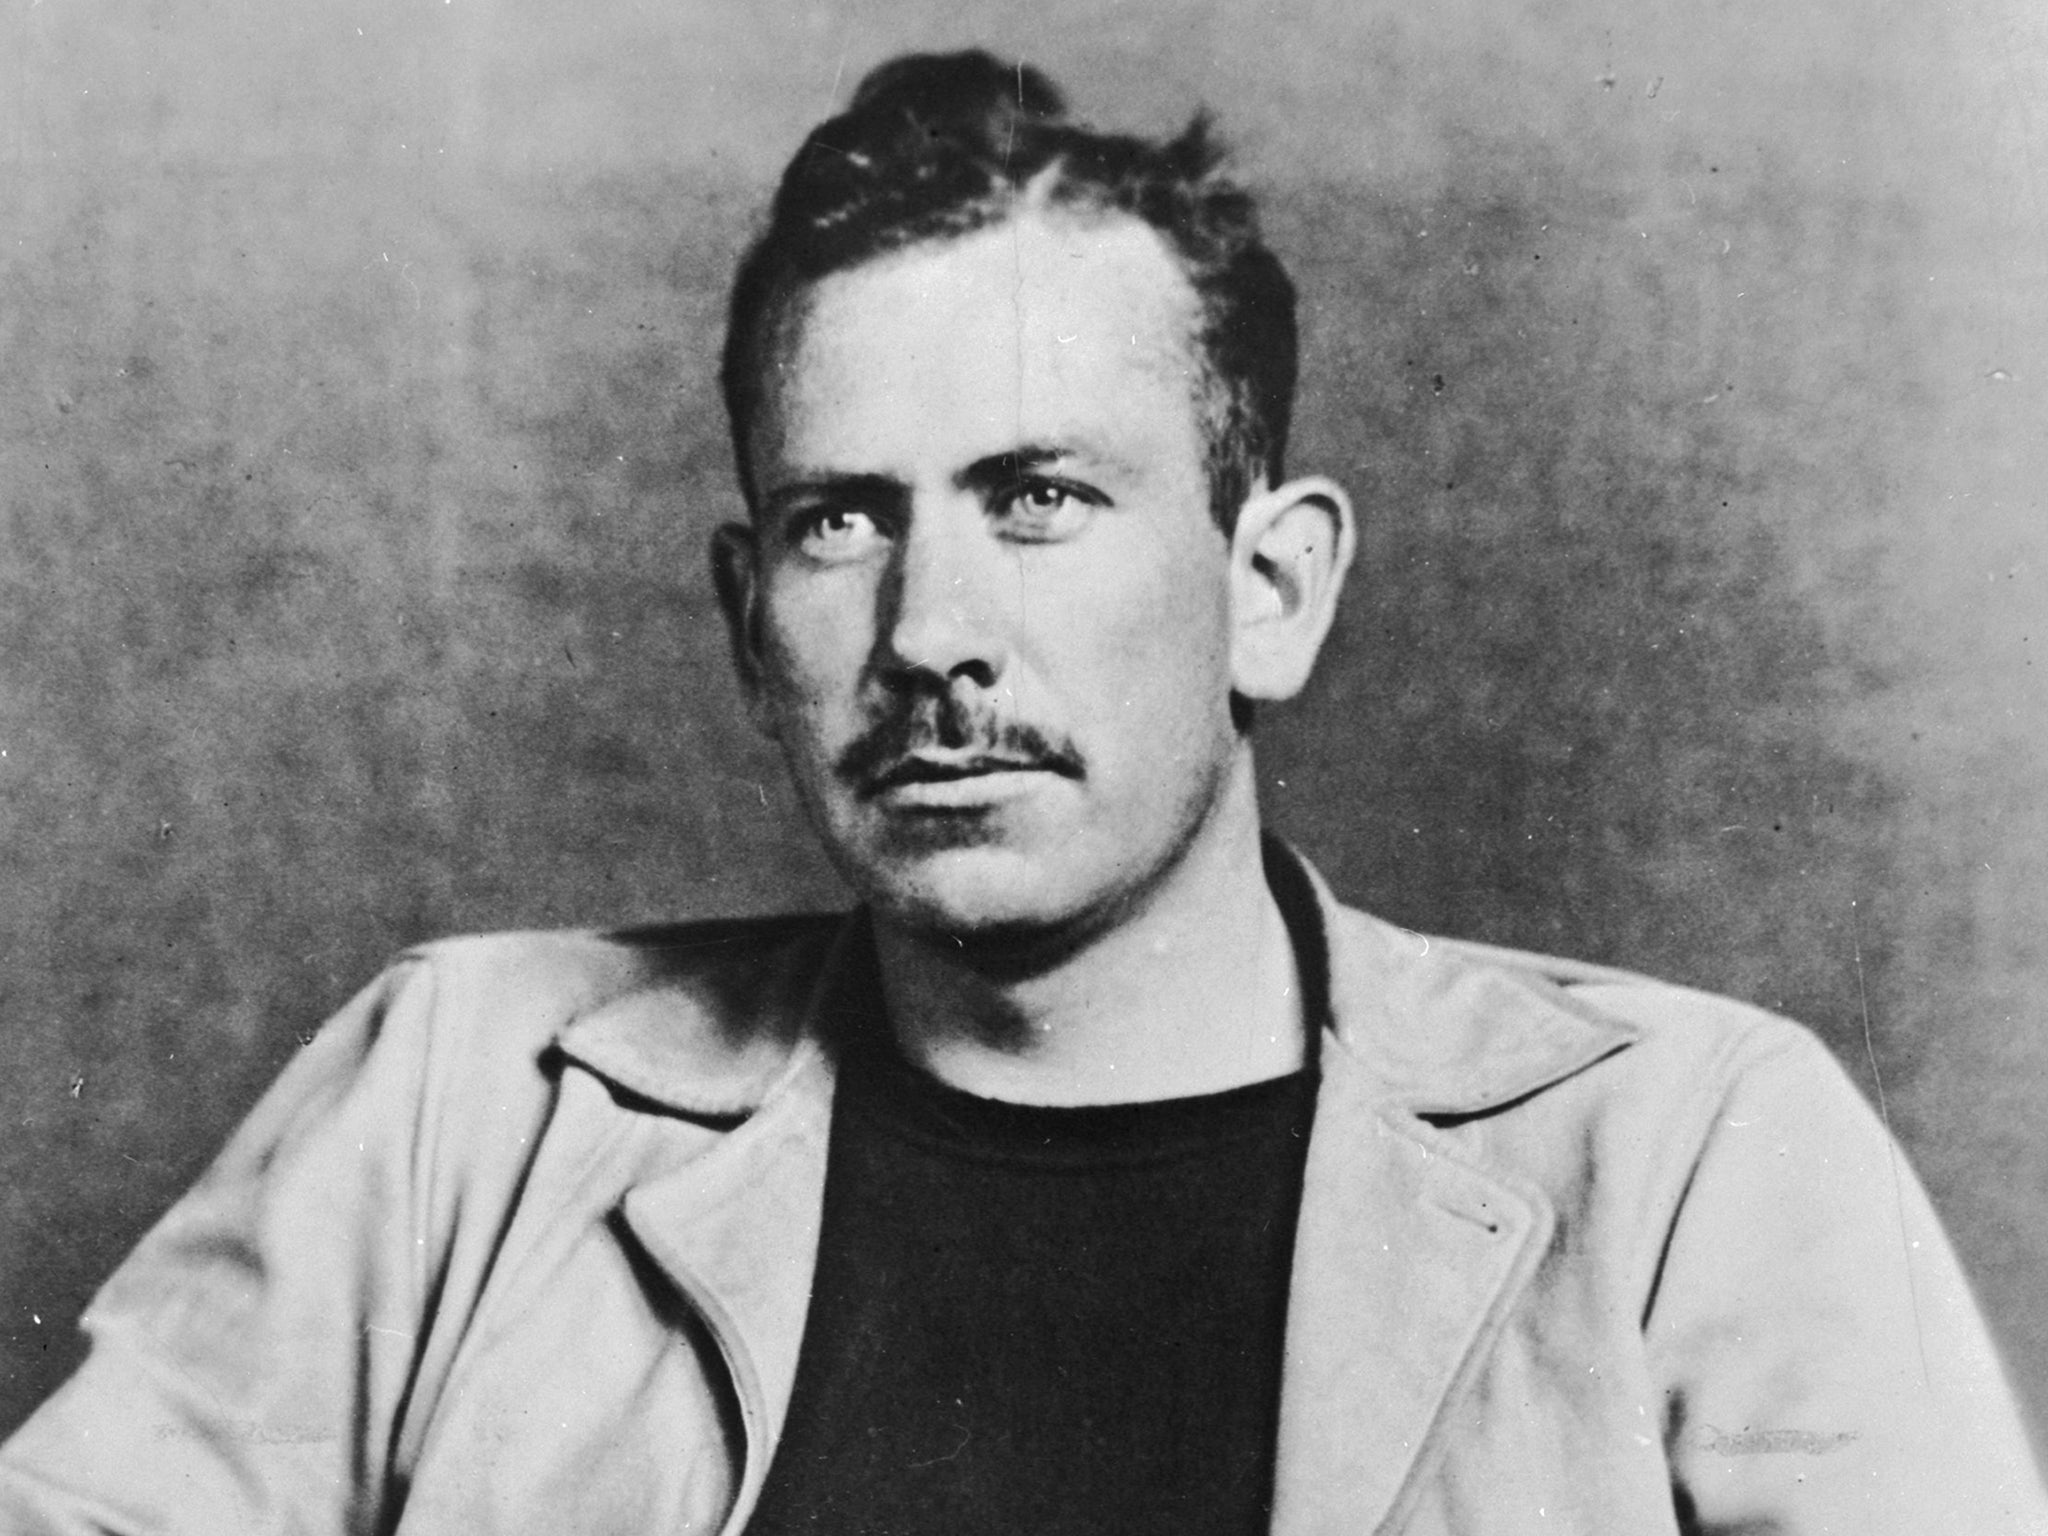 John Steinbeck’s book carries echoes of Cain and Abel